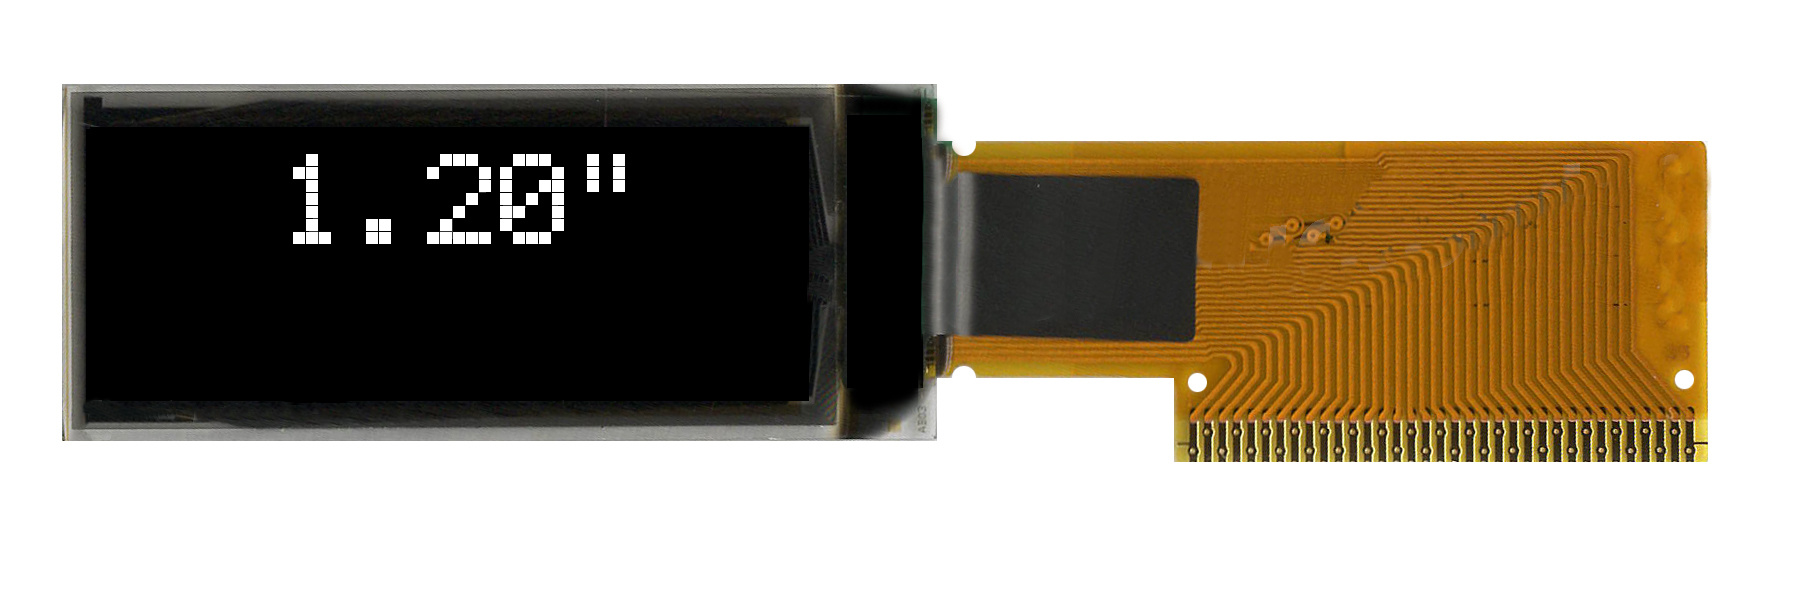 0.91 Inch White OLED Display Module with Resolution 128*32